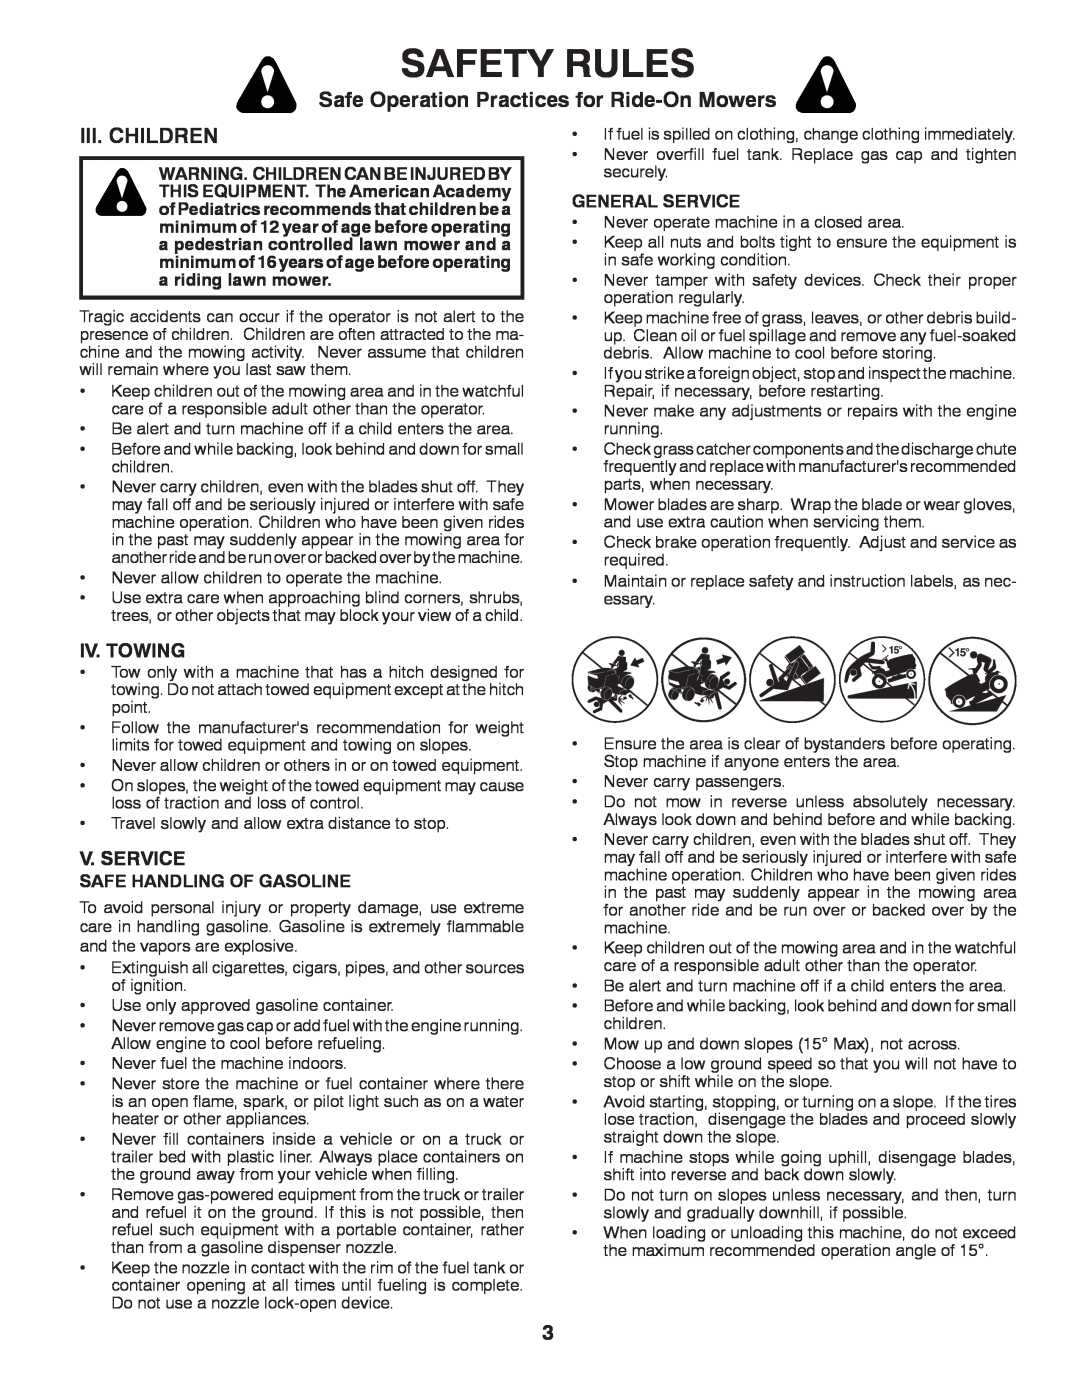 Husqvarna YTH22V42 Iii. Children, Safety Rules, Safe Operation Practices for Ride-On Mowers, Iv. Towing, V. Service 